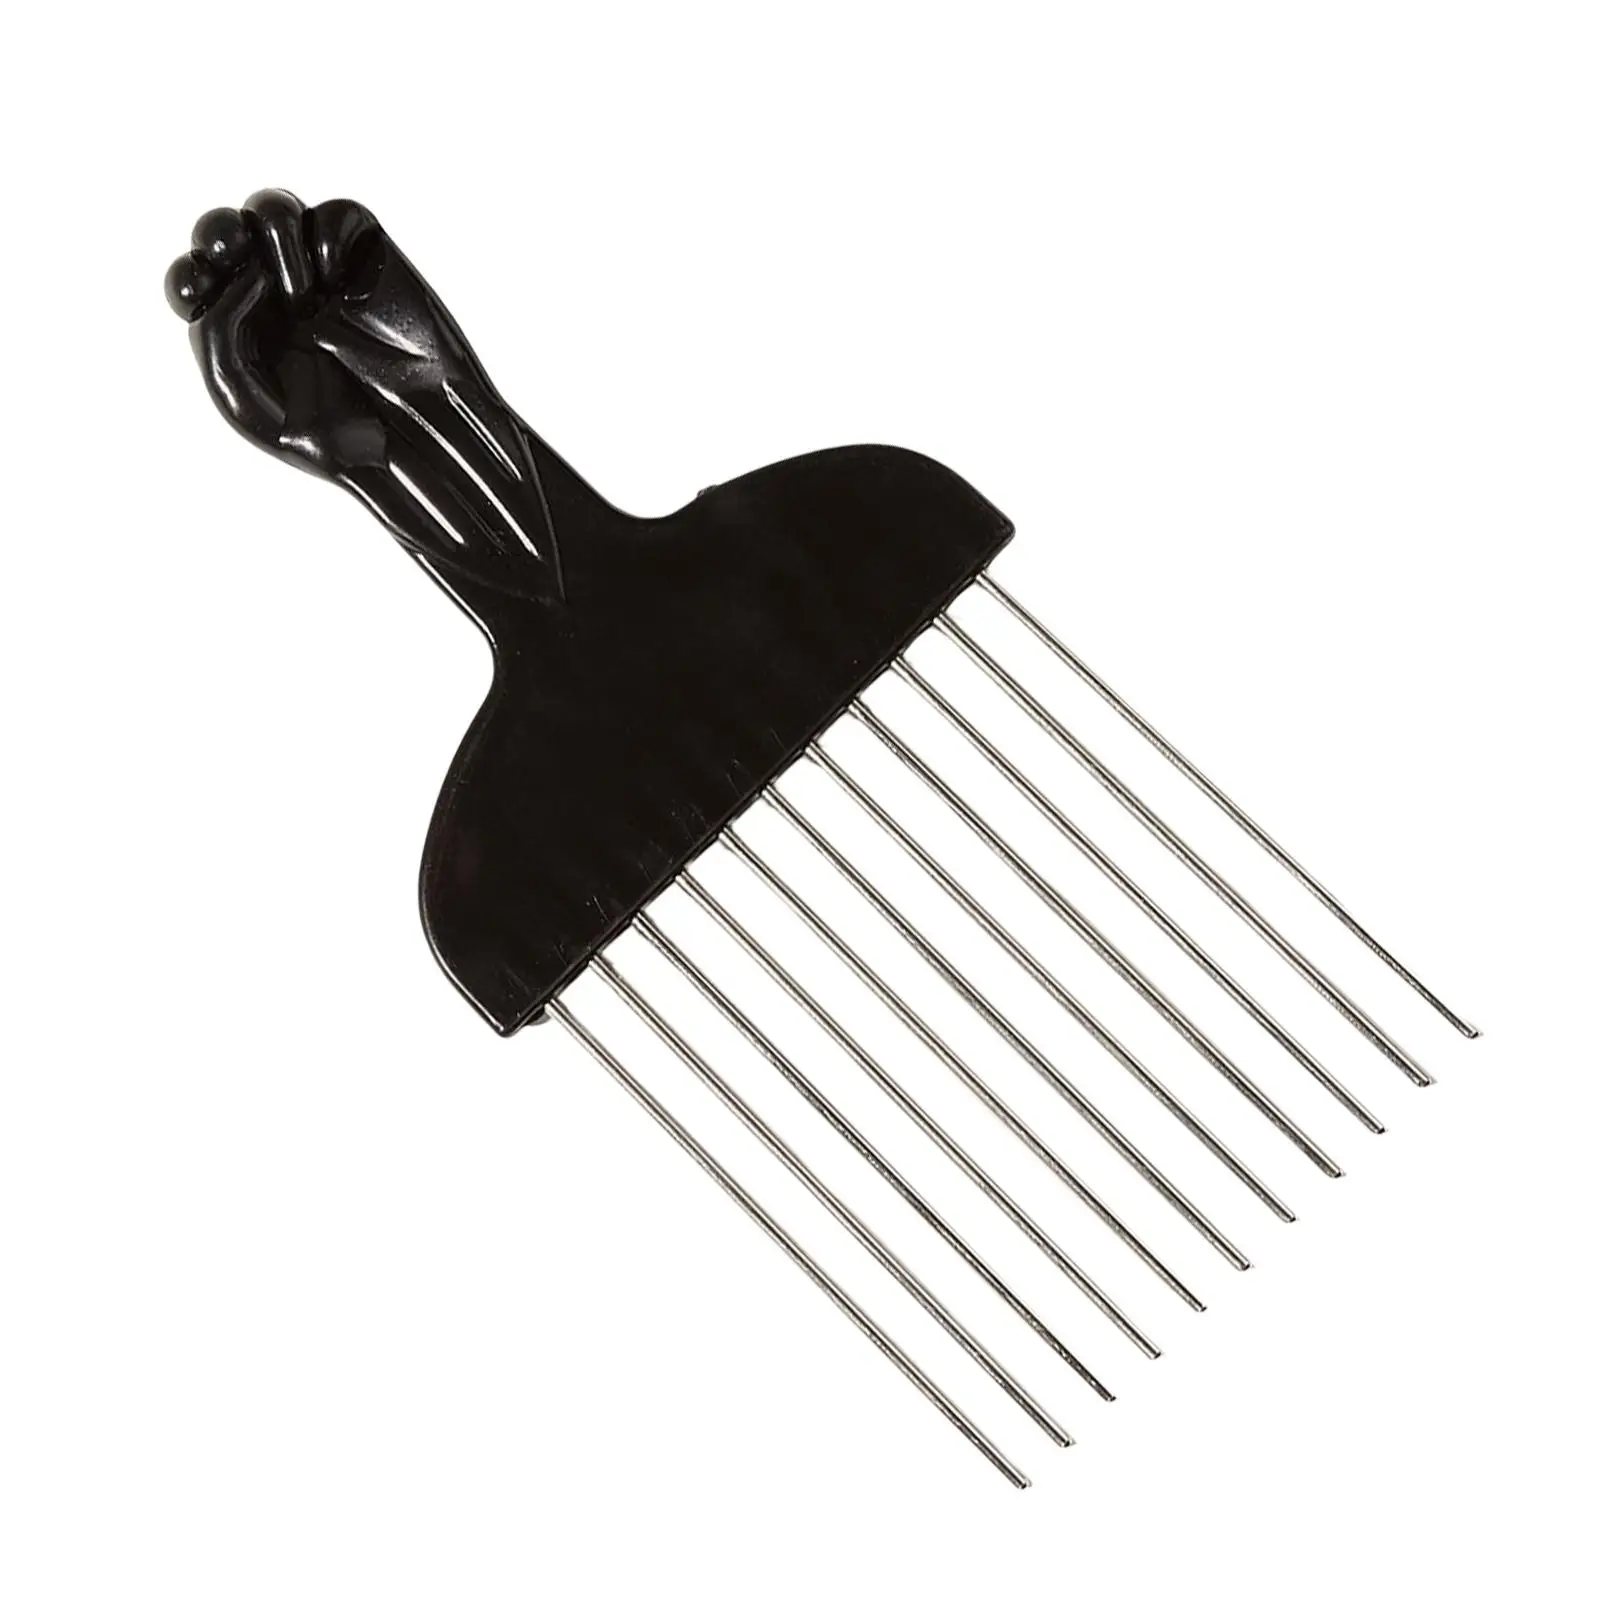 Prong Combs afro Combs Fist Hair Comb Durable Practical Hairdressing Styling Tool Detangle Braid Metal Hair Pick for Home Men